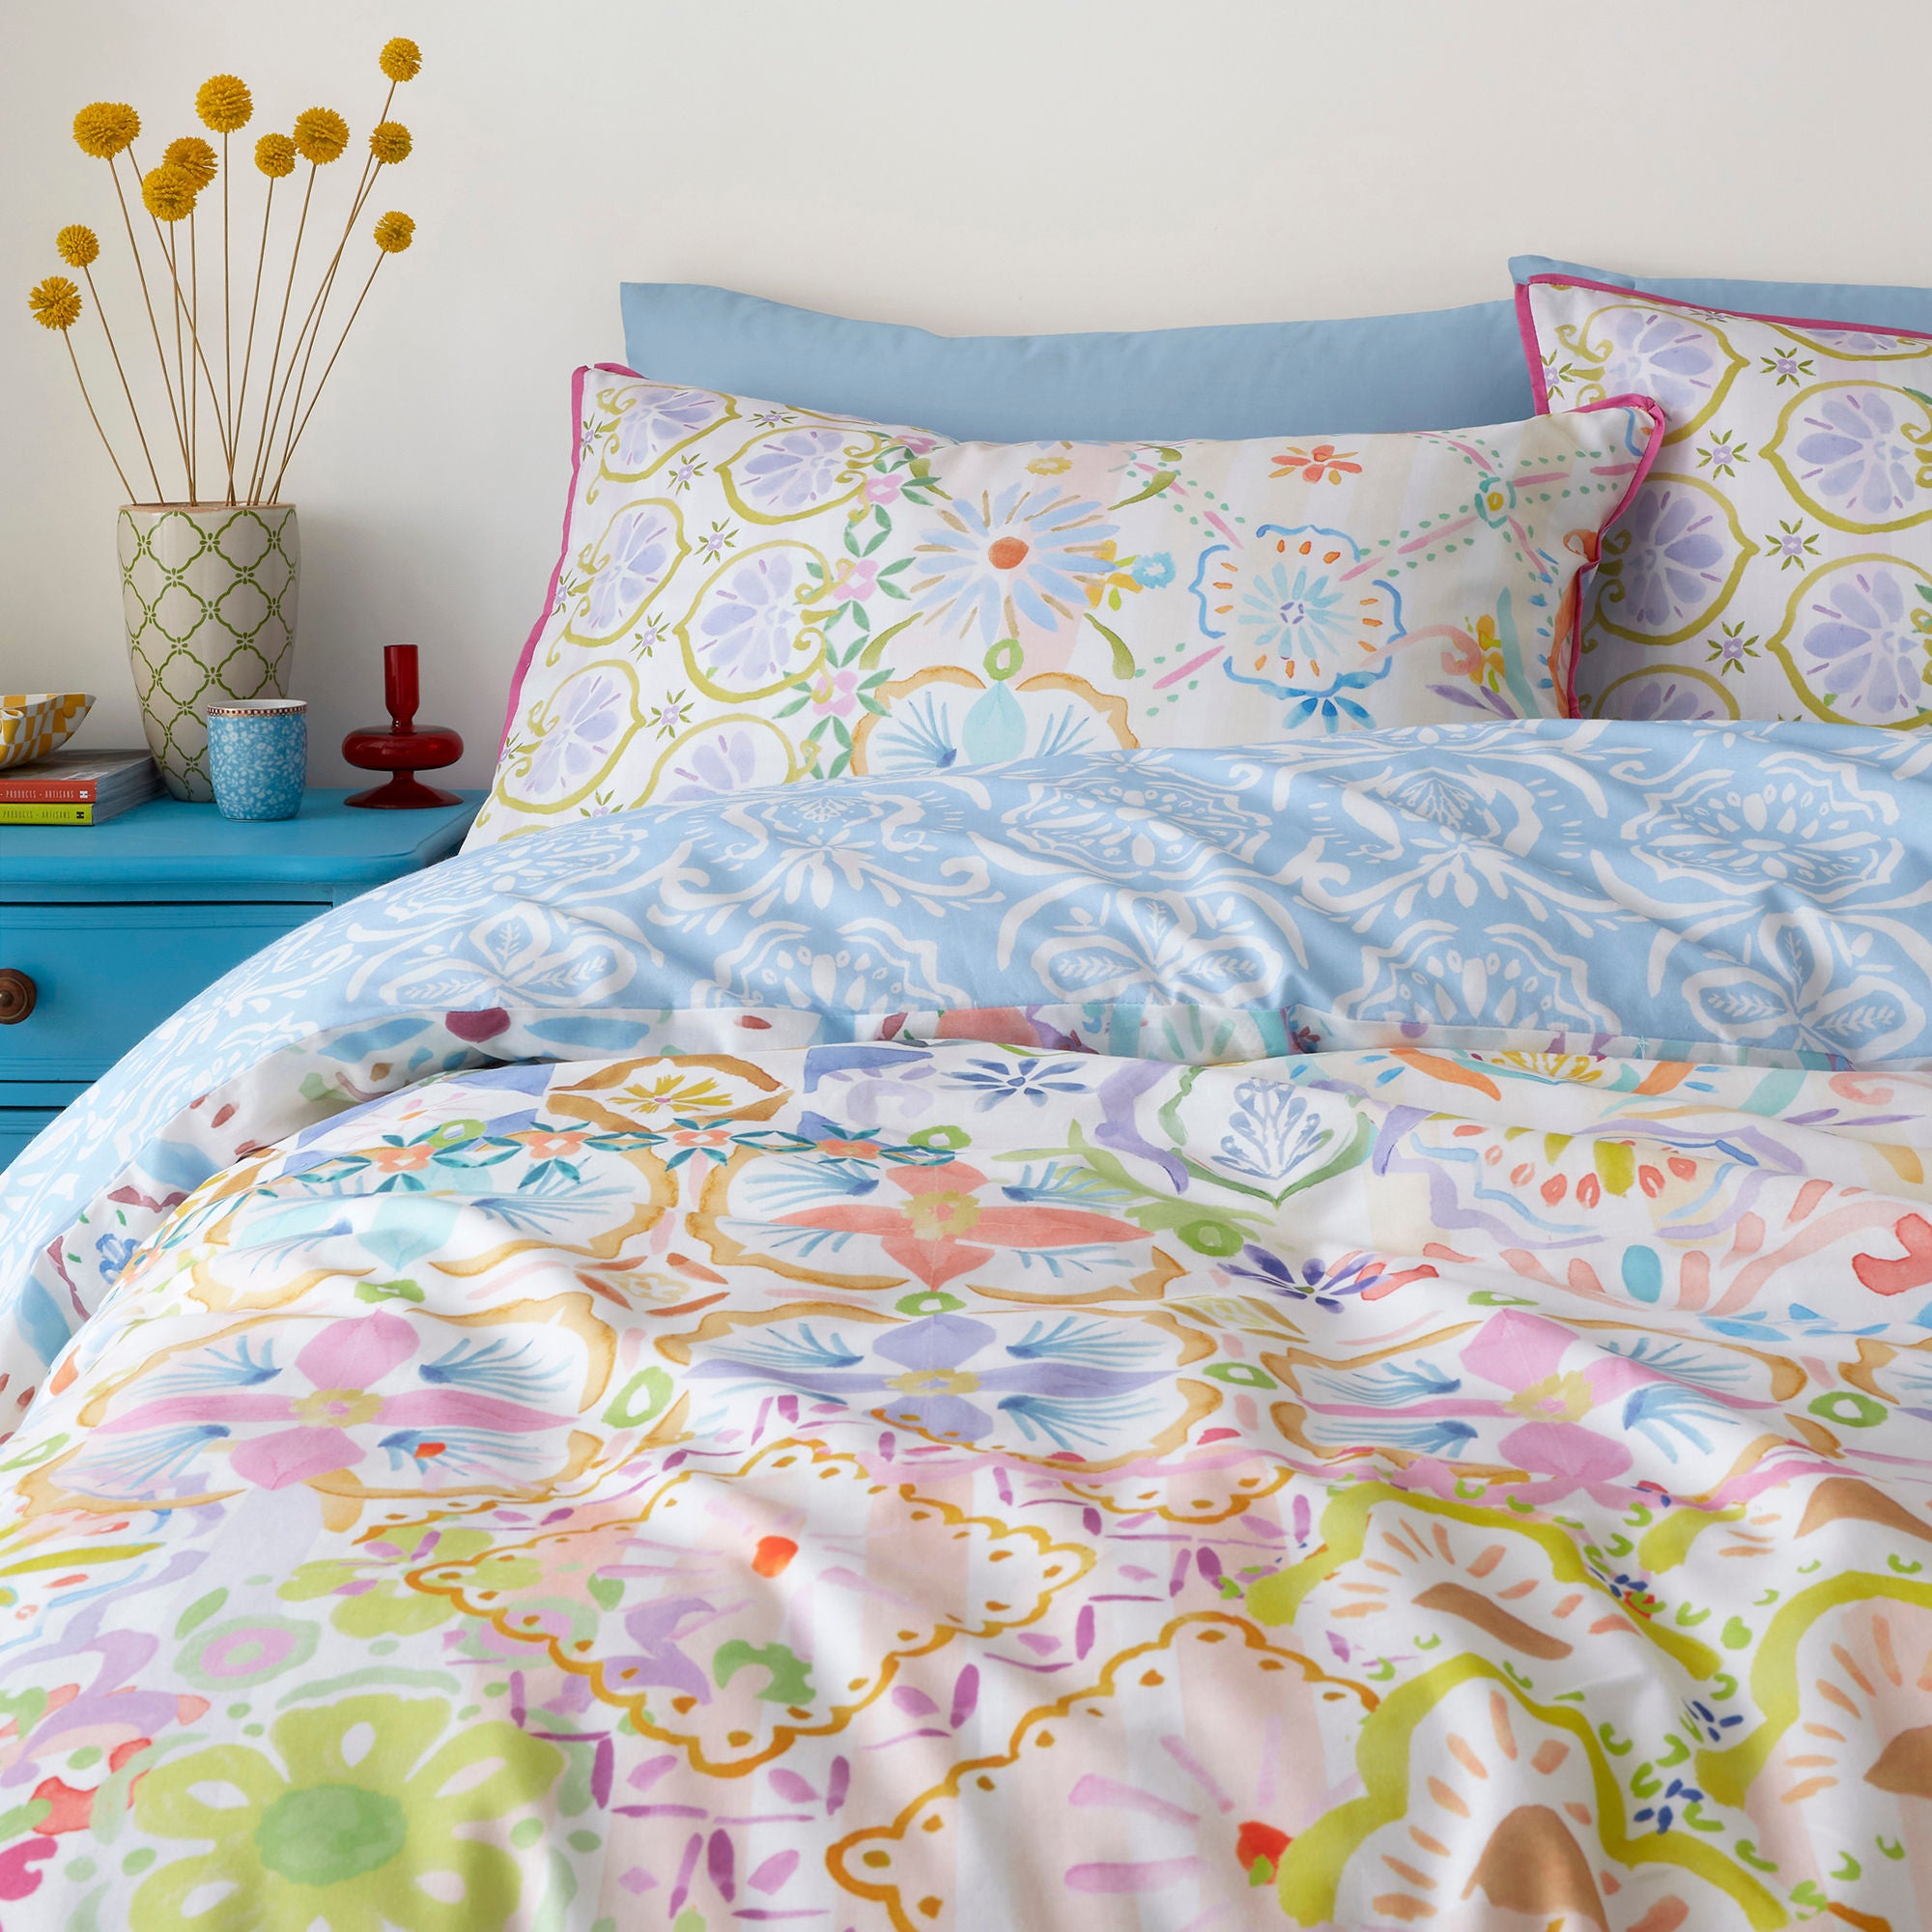 Casablanca Duvet Cover Set by Appletree Style in Multi - Duvet Cover Set - Appletree Style